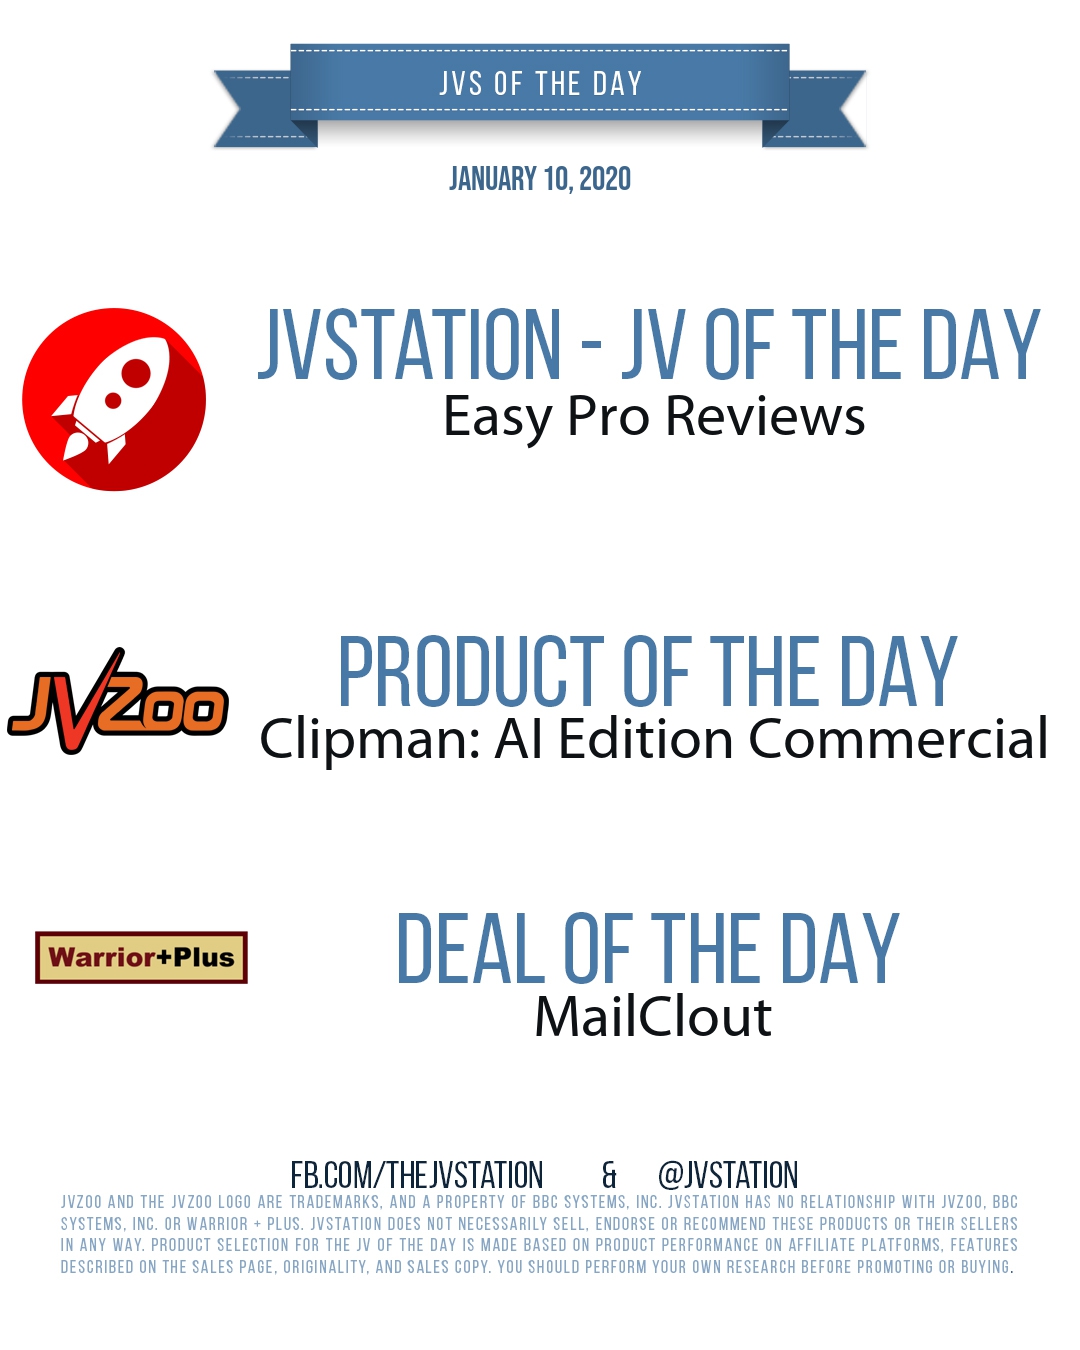 JVs of the day - January 10, 2020